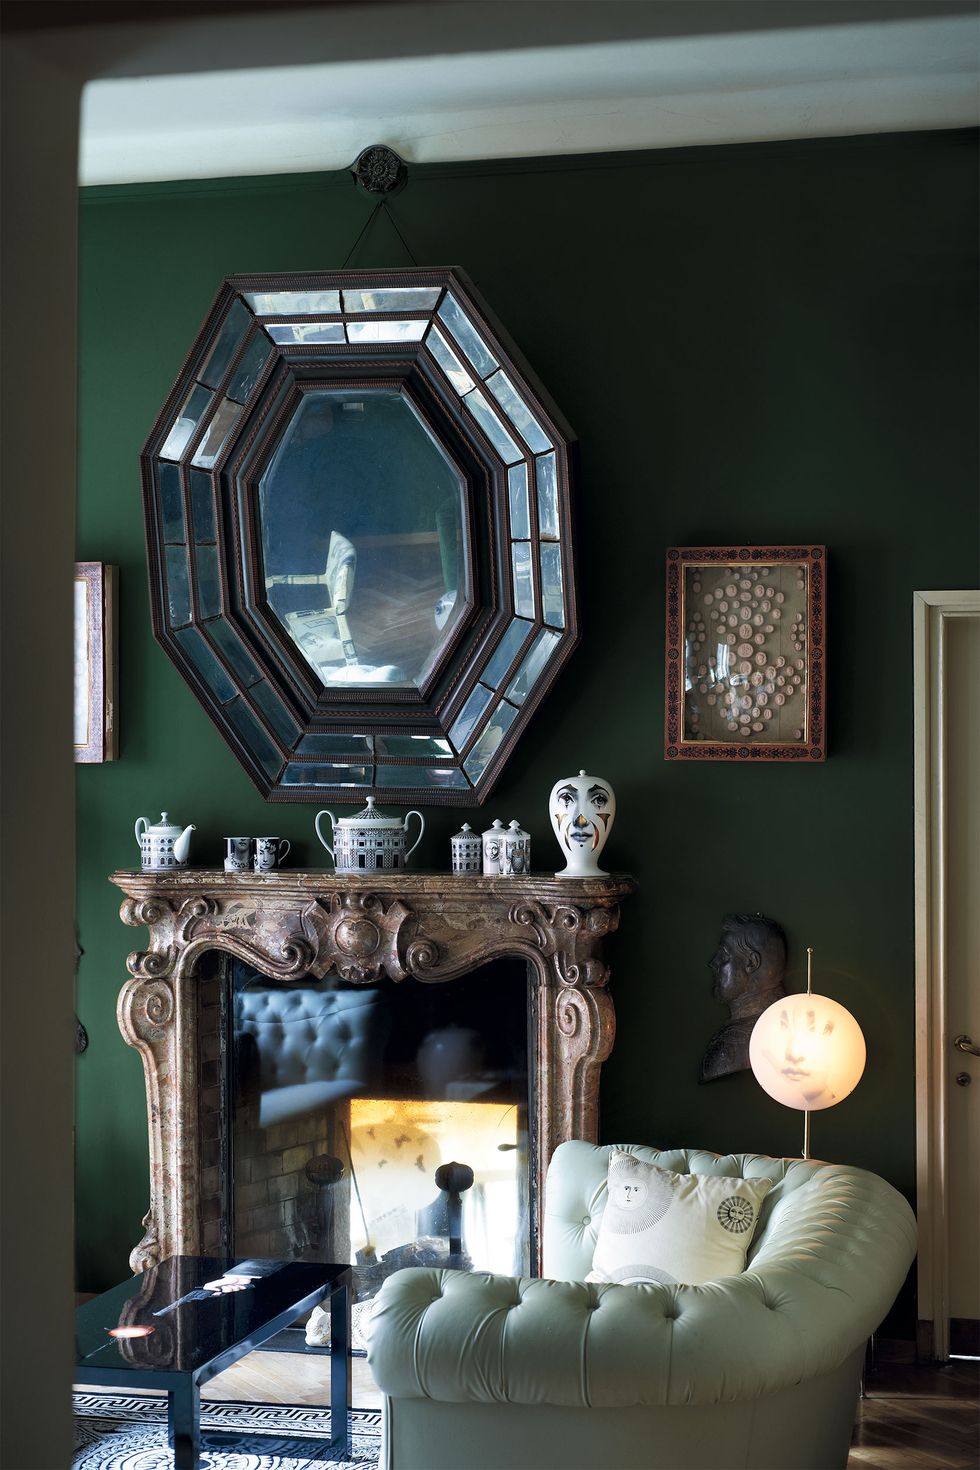 a fireplace in a room with tufted leather sofa and art deco mirror over the mantel filled with objects